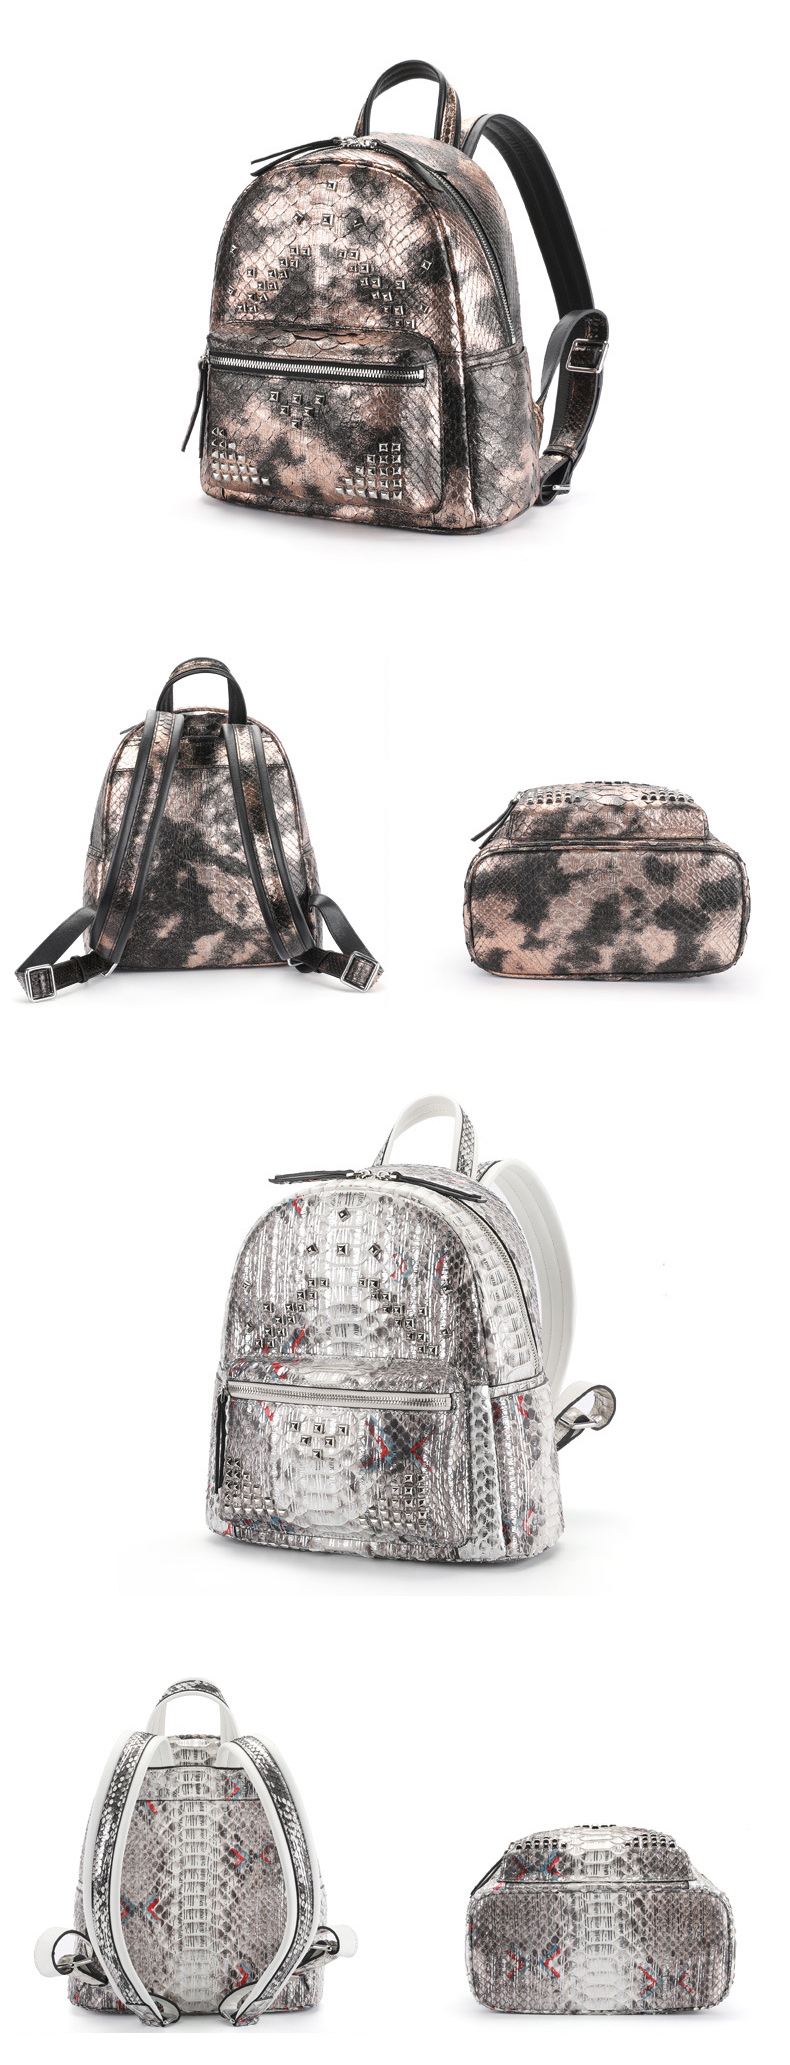 laether backpacks